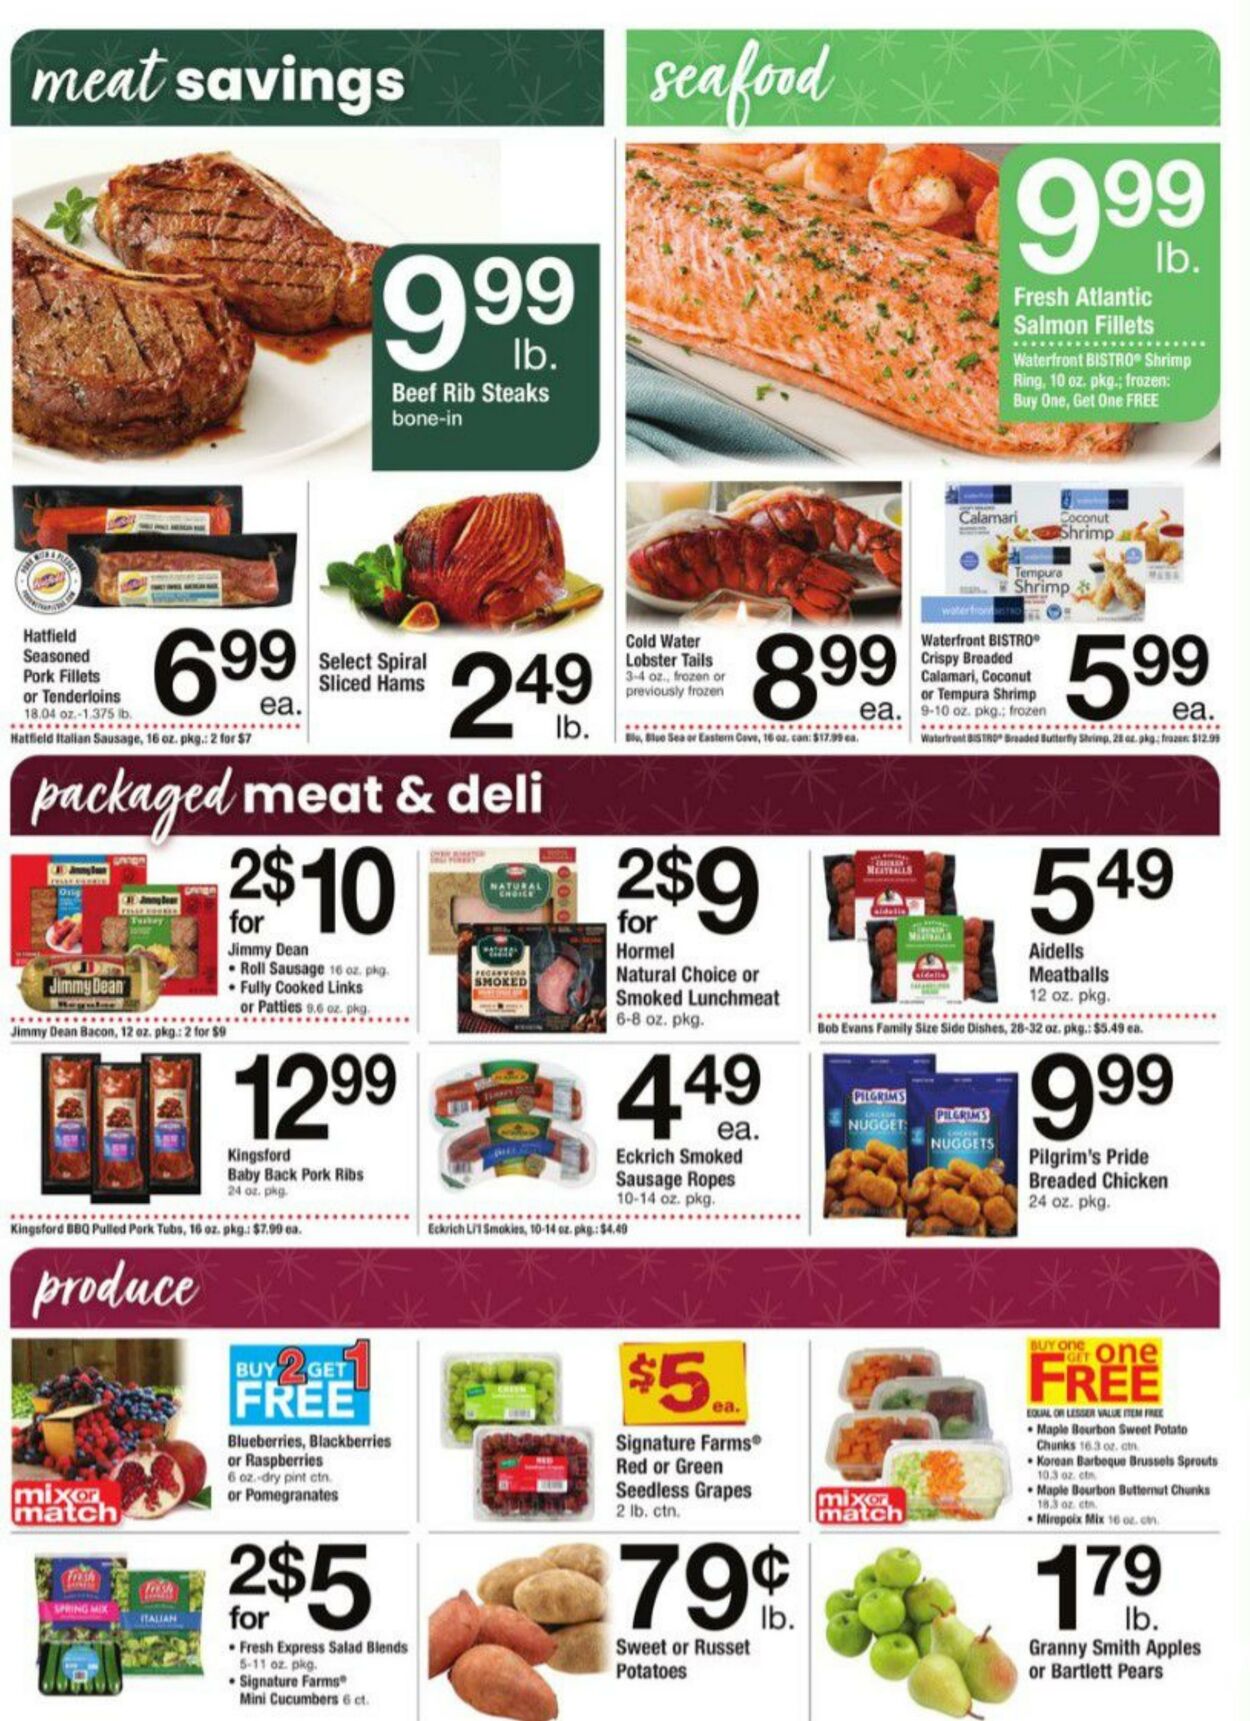 Weekly ad Acme 11/25/2022 - 12/01/2022